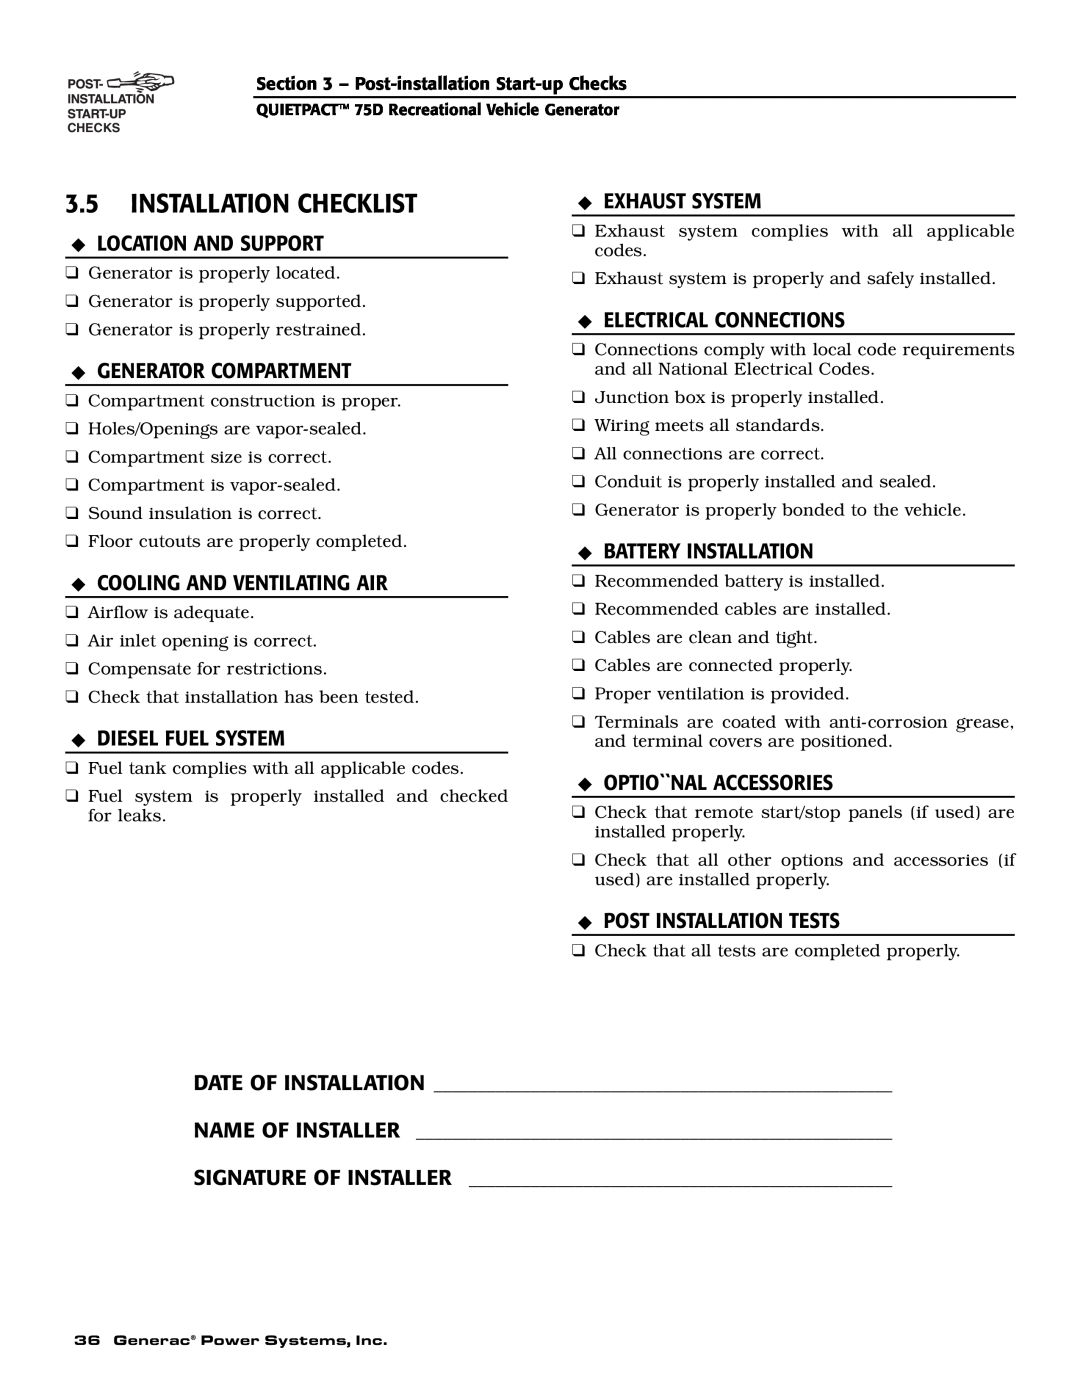 Guardian Technologies 004270-2 Installation Checklist, Location And Support, Generator Compartment, Diesel Fuel System 